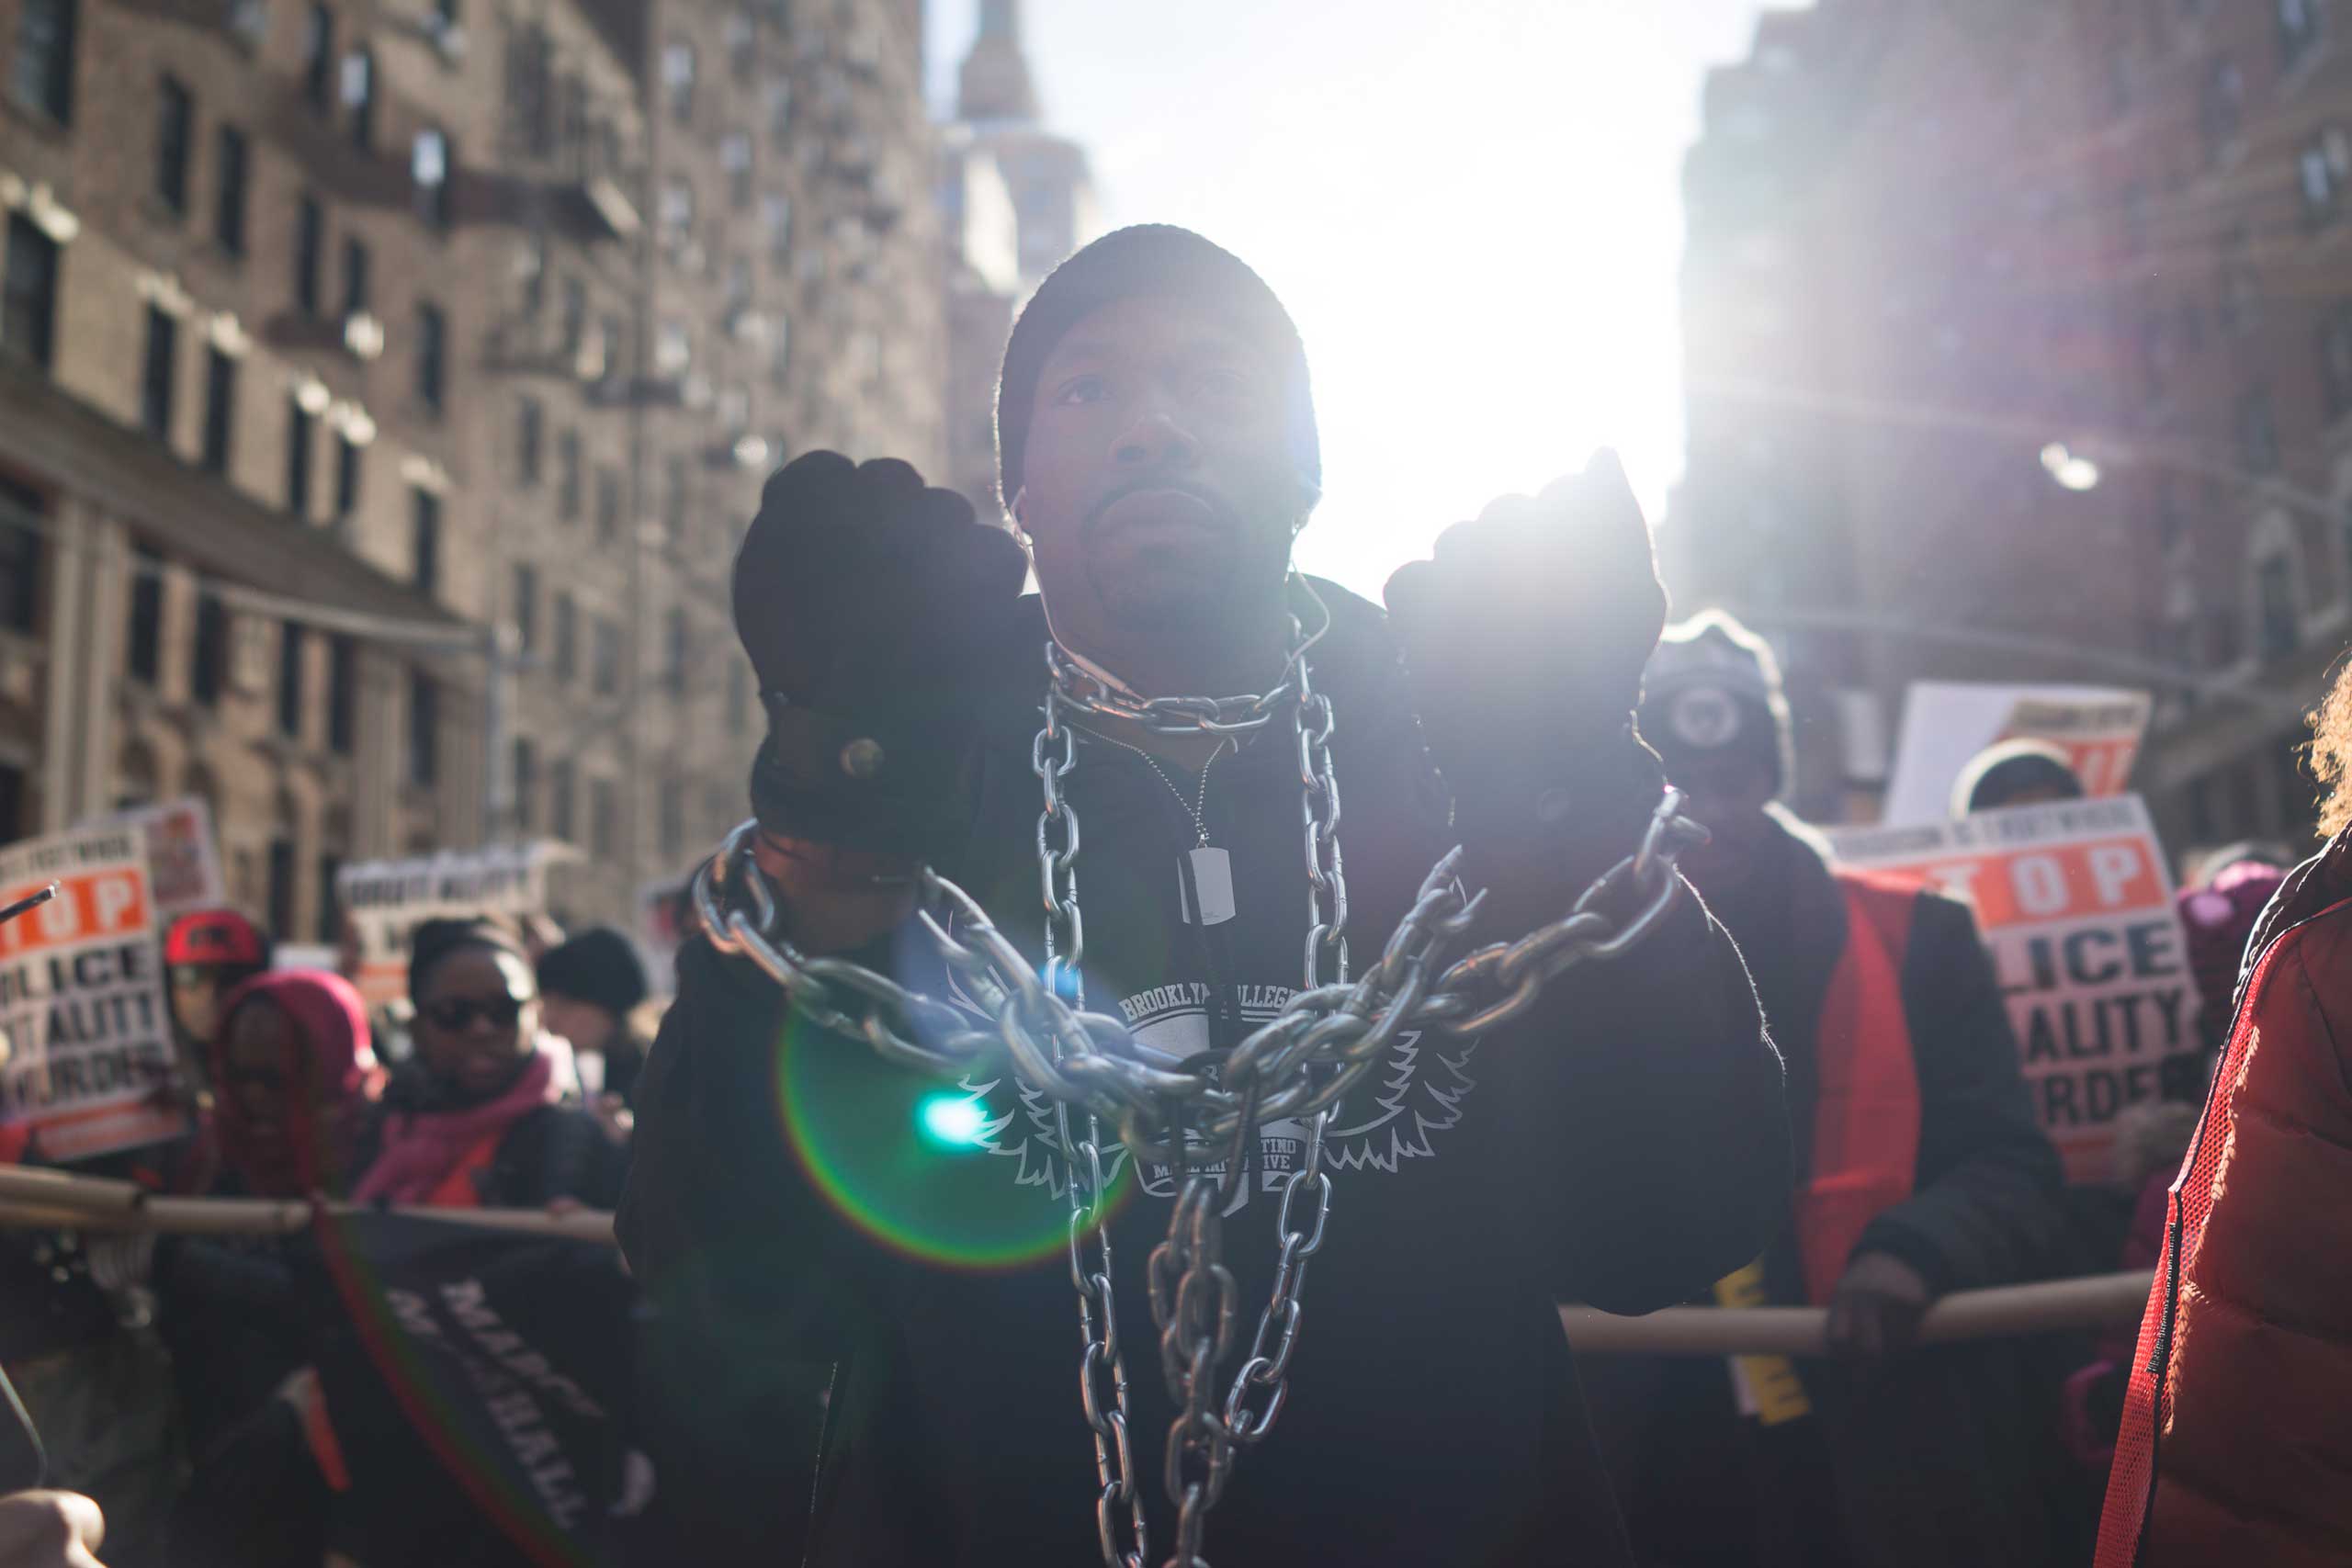 Thousands of protestors demonstrate against police brutality in New York City as part of the Millions March on Dec. 13, 2014.